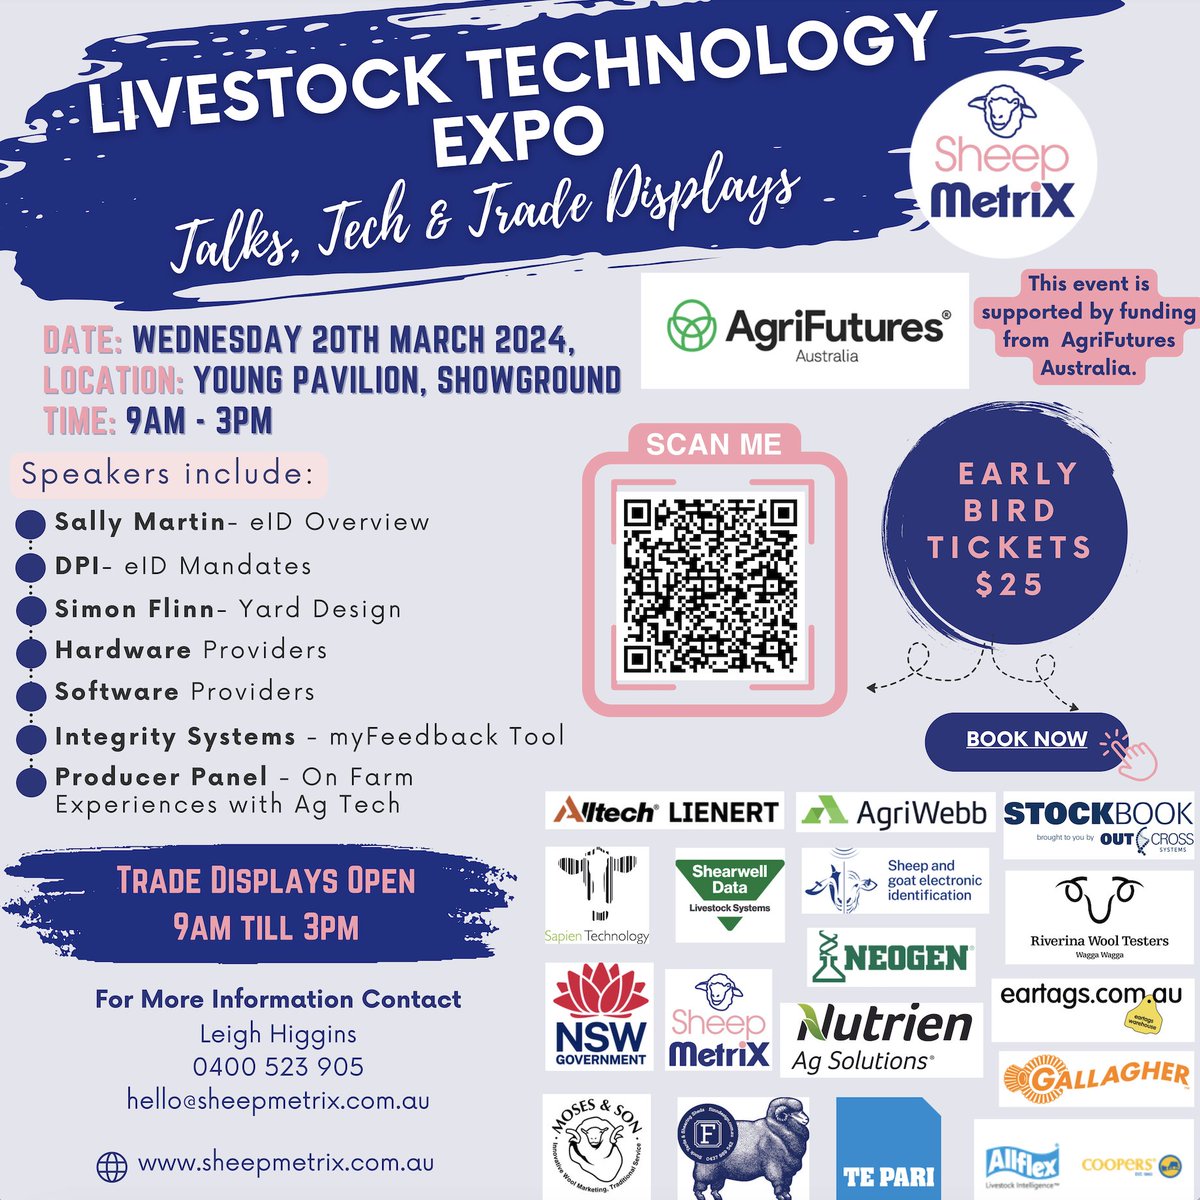 Excited for Livestock Tech Expo tomorrow! Join us at Young Pavilion for a day packed with Ag Tech insights and innovations! 🐑🚜 Discover top Sheep eID Equipment from Te Pari, Prattley/Datamars, chat with Moses & Son about our latest tech gear.  #LivestockTechExpo